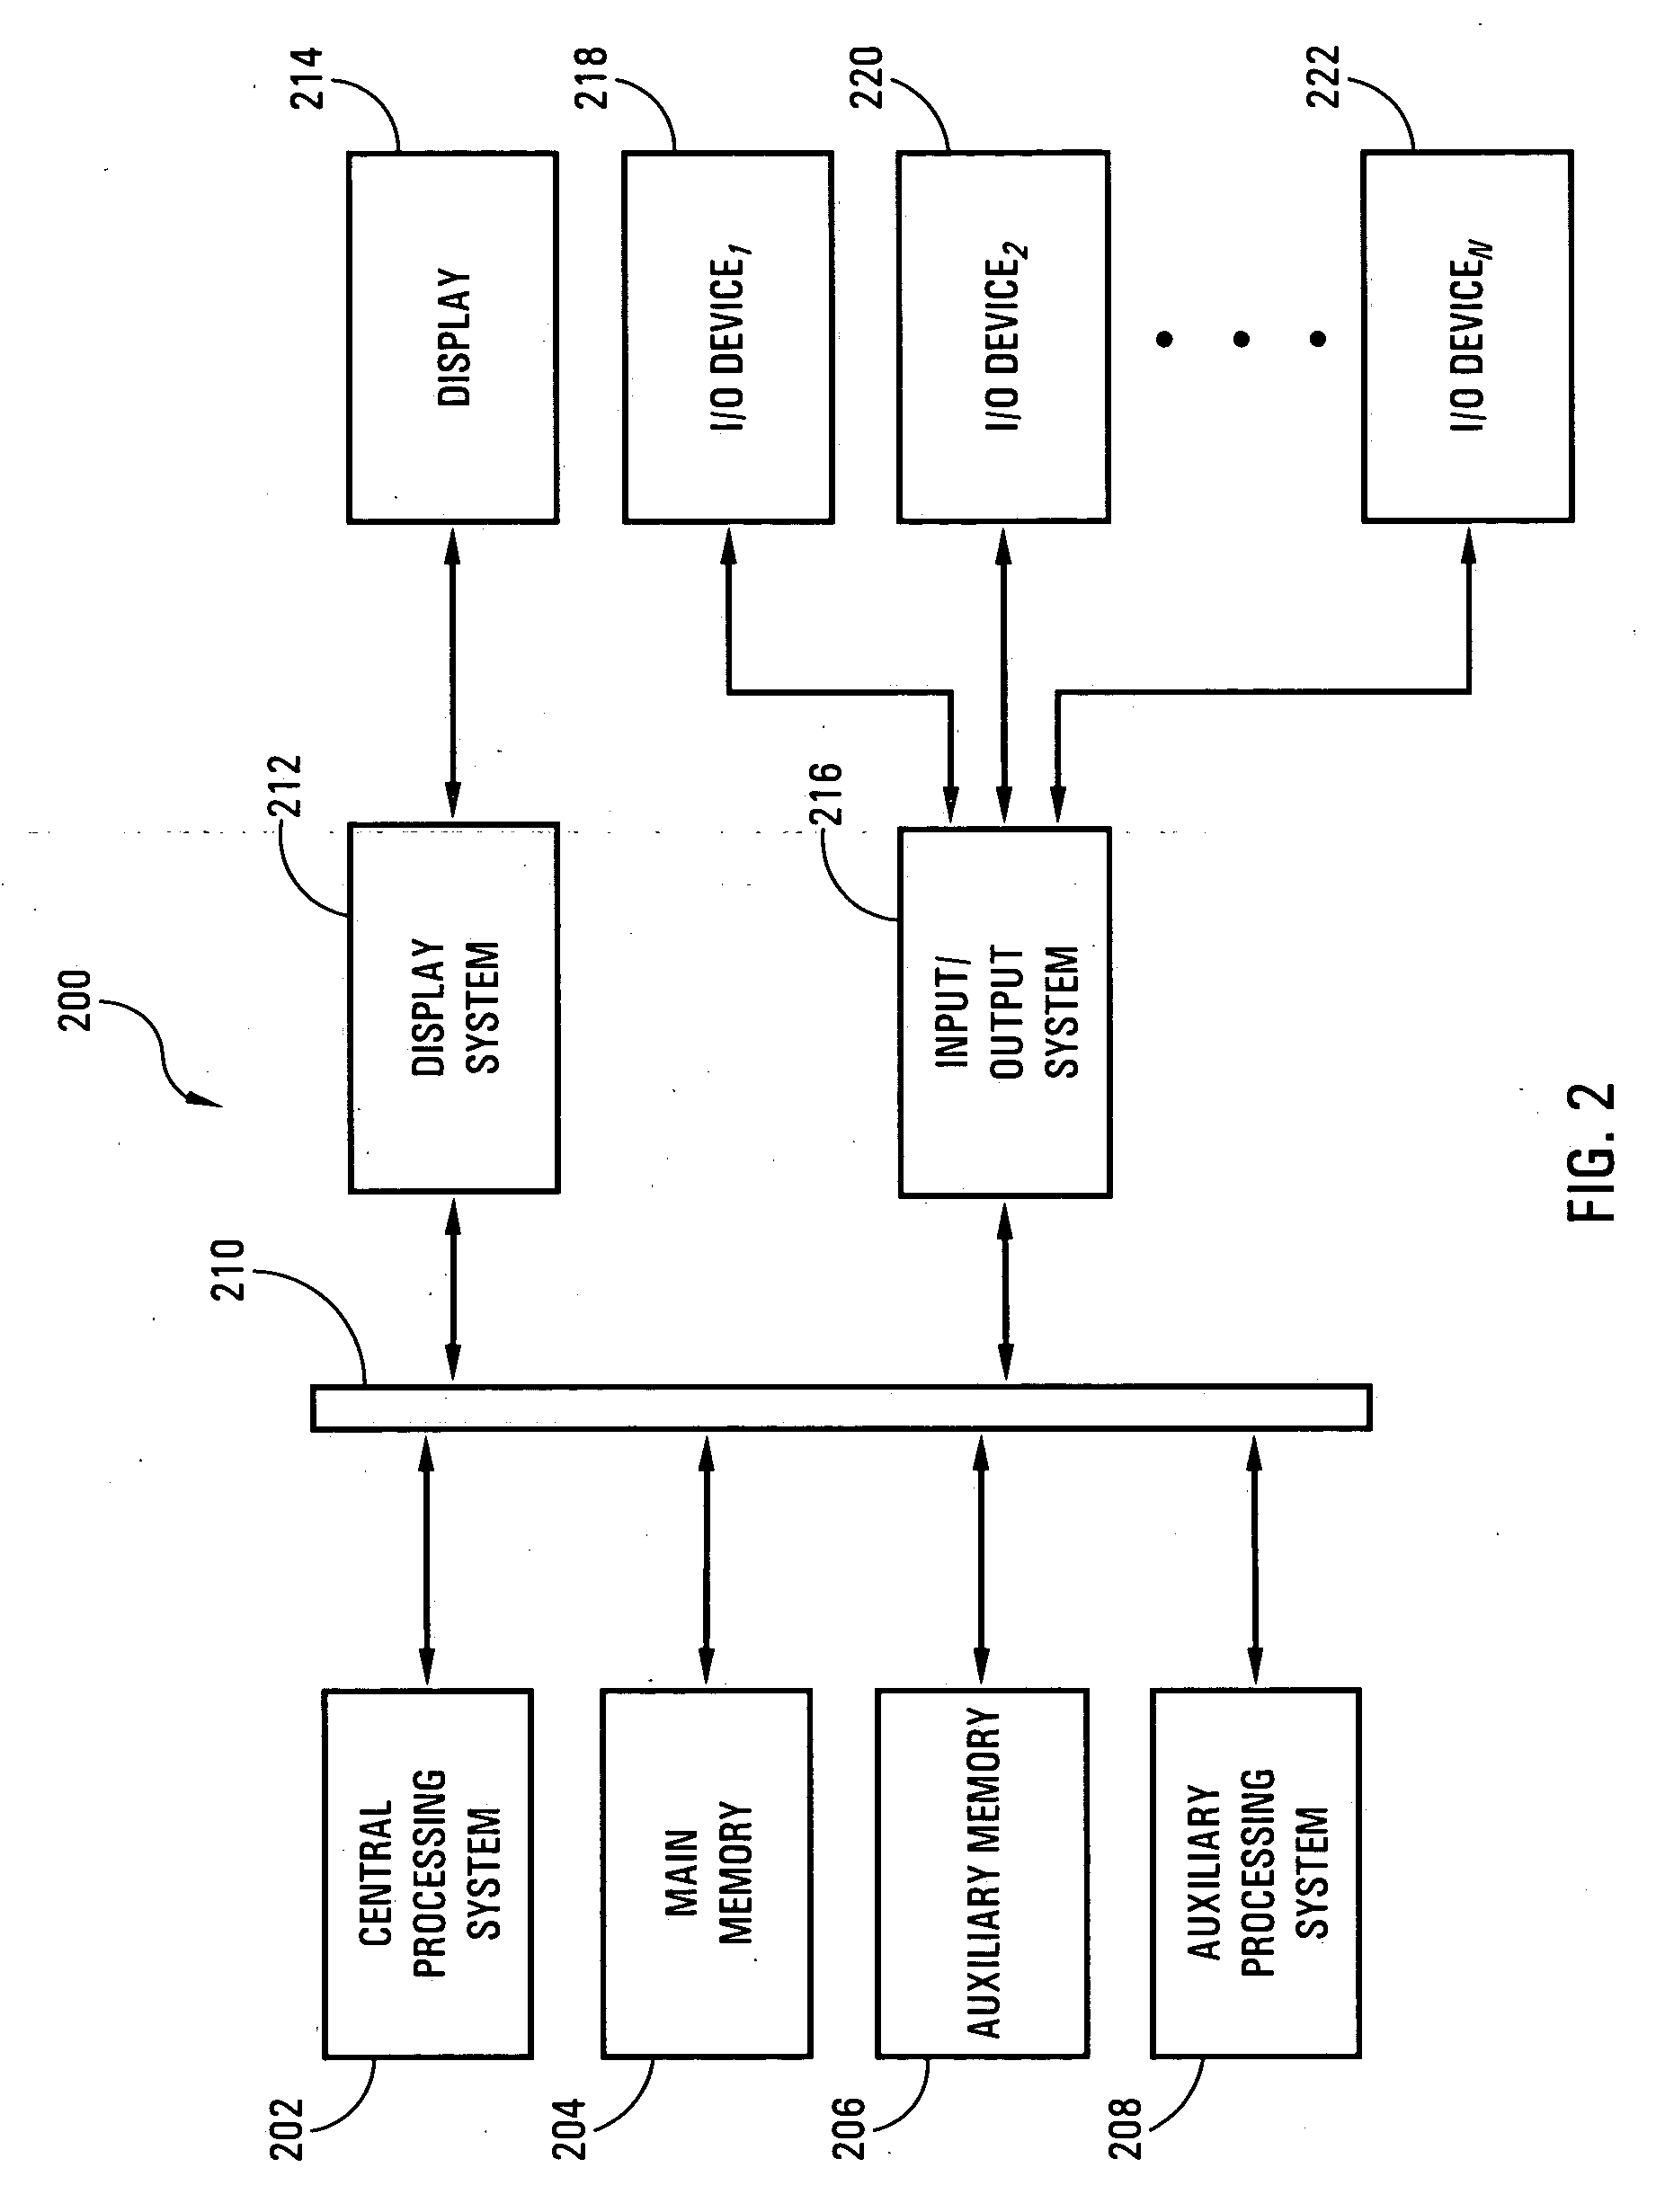 Speaking words language instruction system and methods